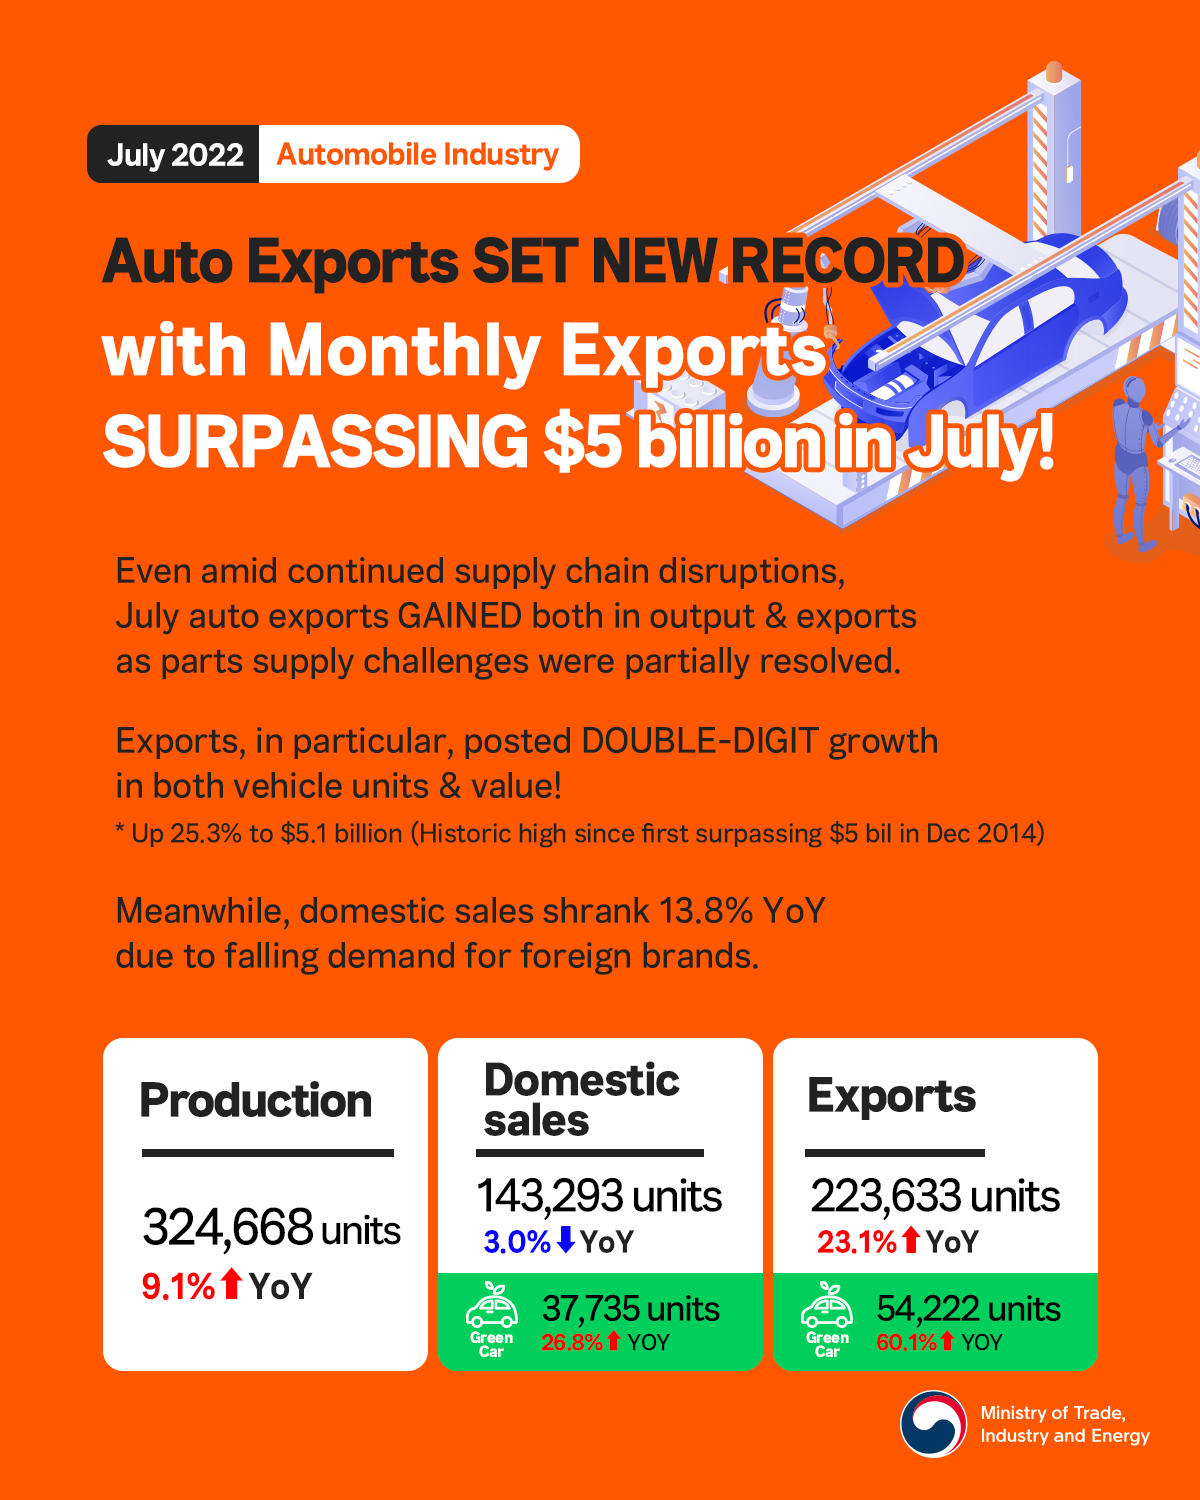 Korea's auto exports set new highs in July!